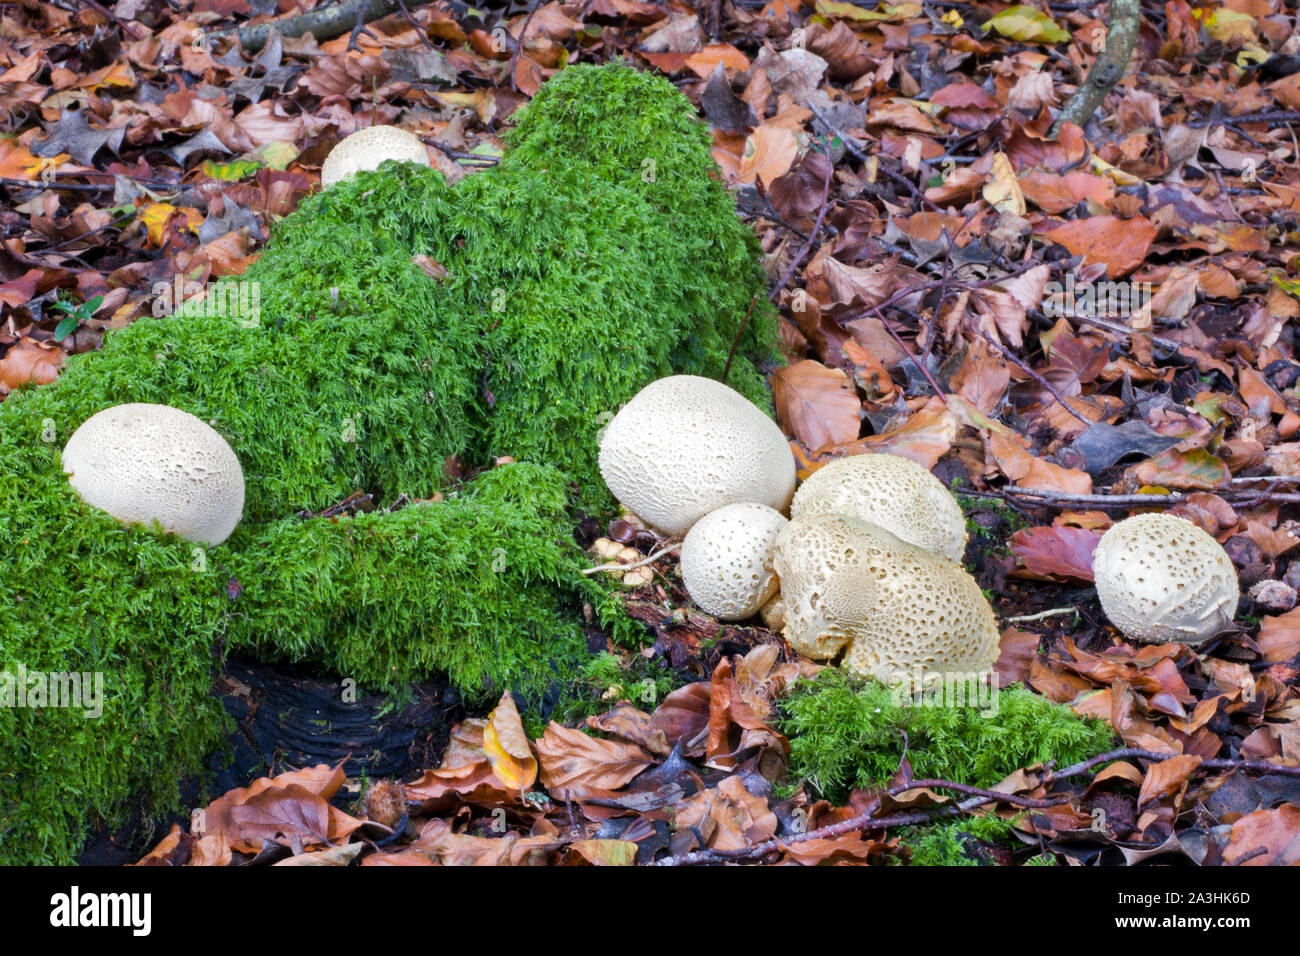 Common Earthball (Scleroderma citrinum) occurs widely in woods, heathland and grassland from autumn to winter. It is a poisonous species. Stock Photo